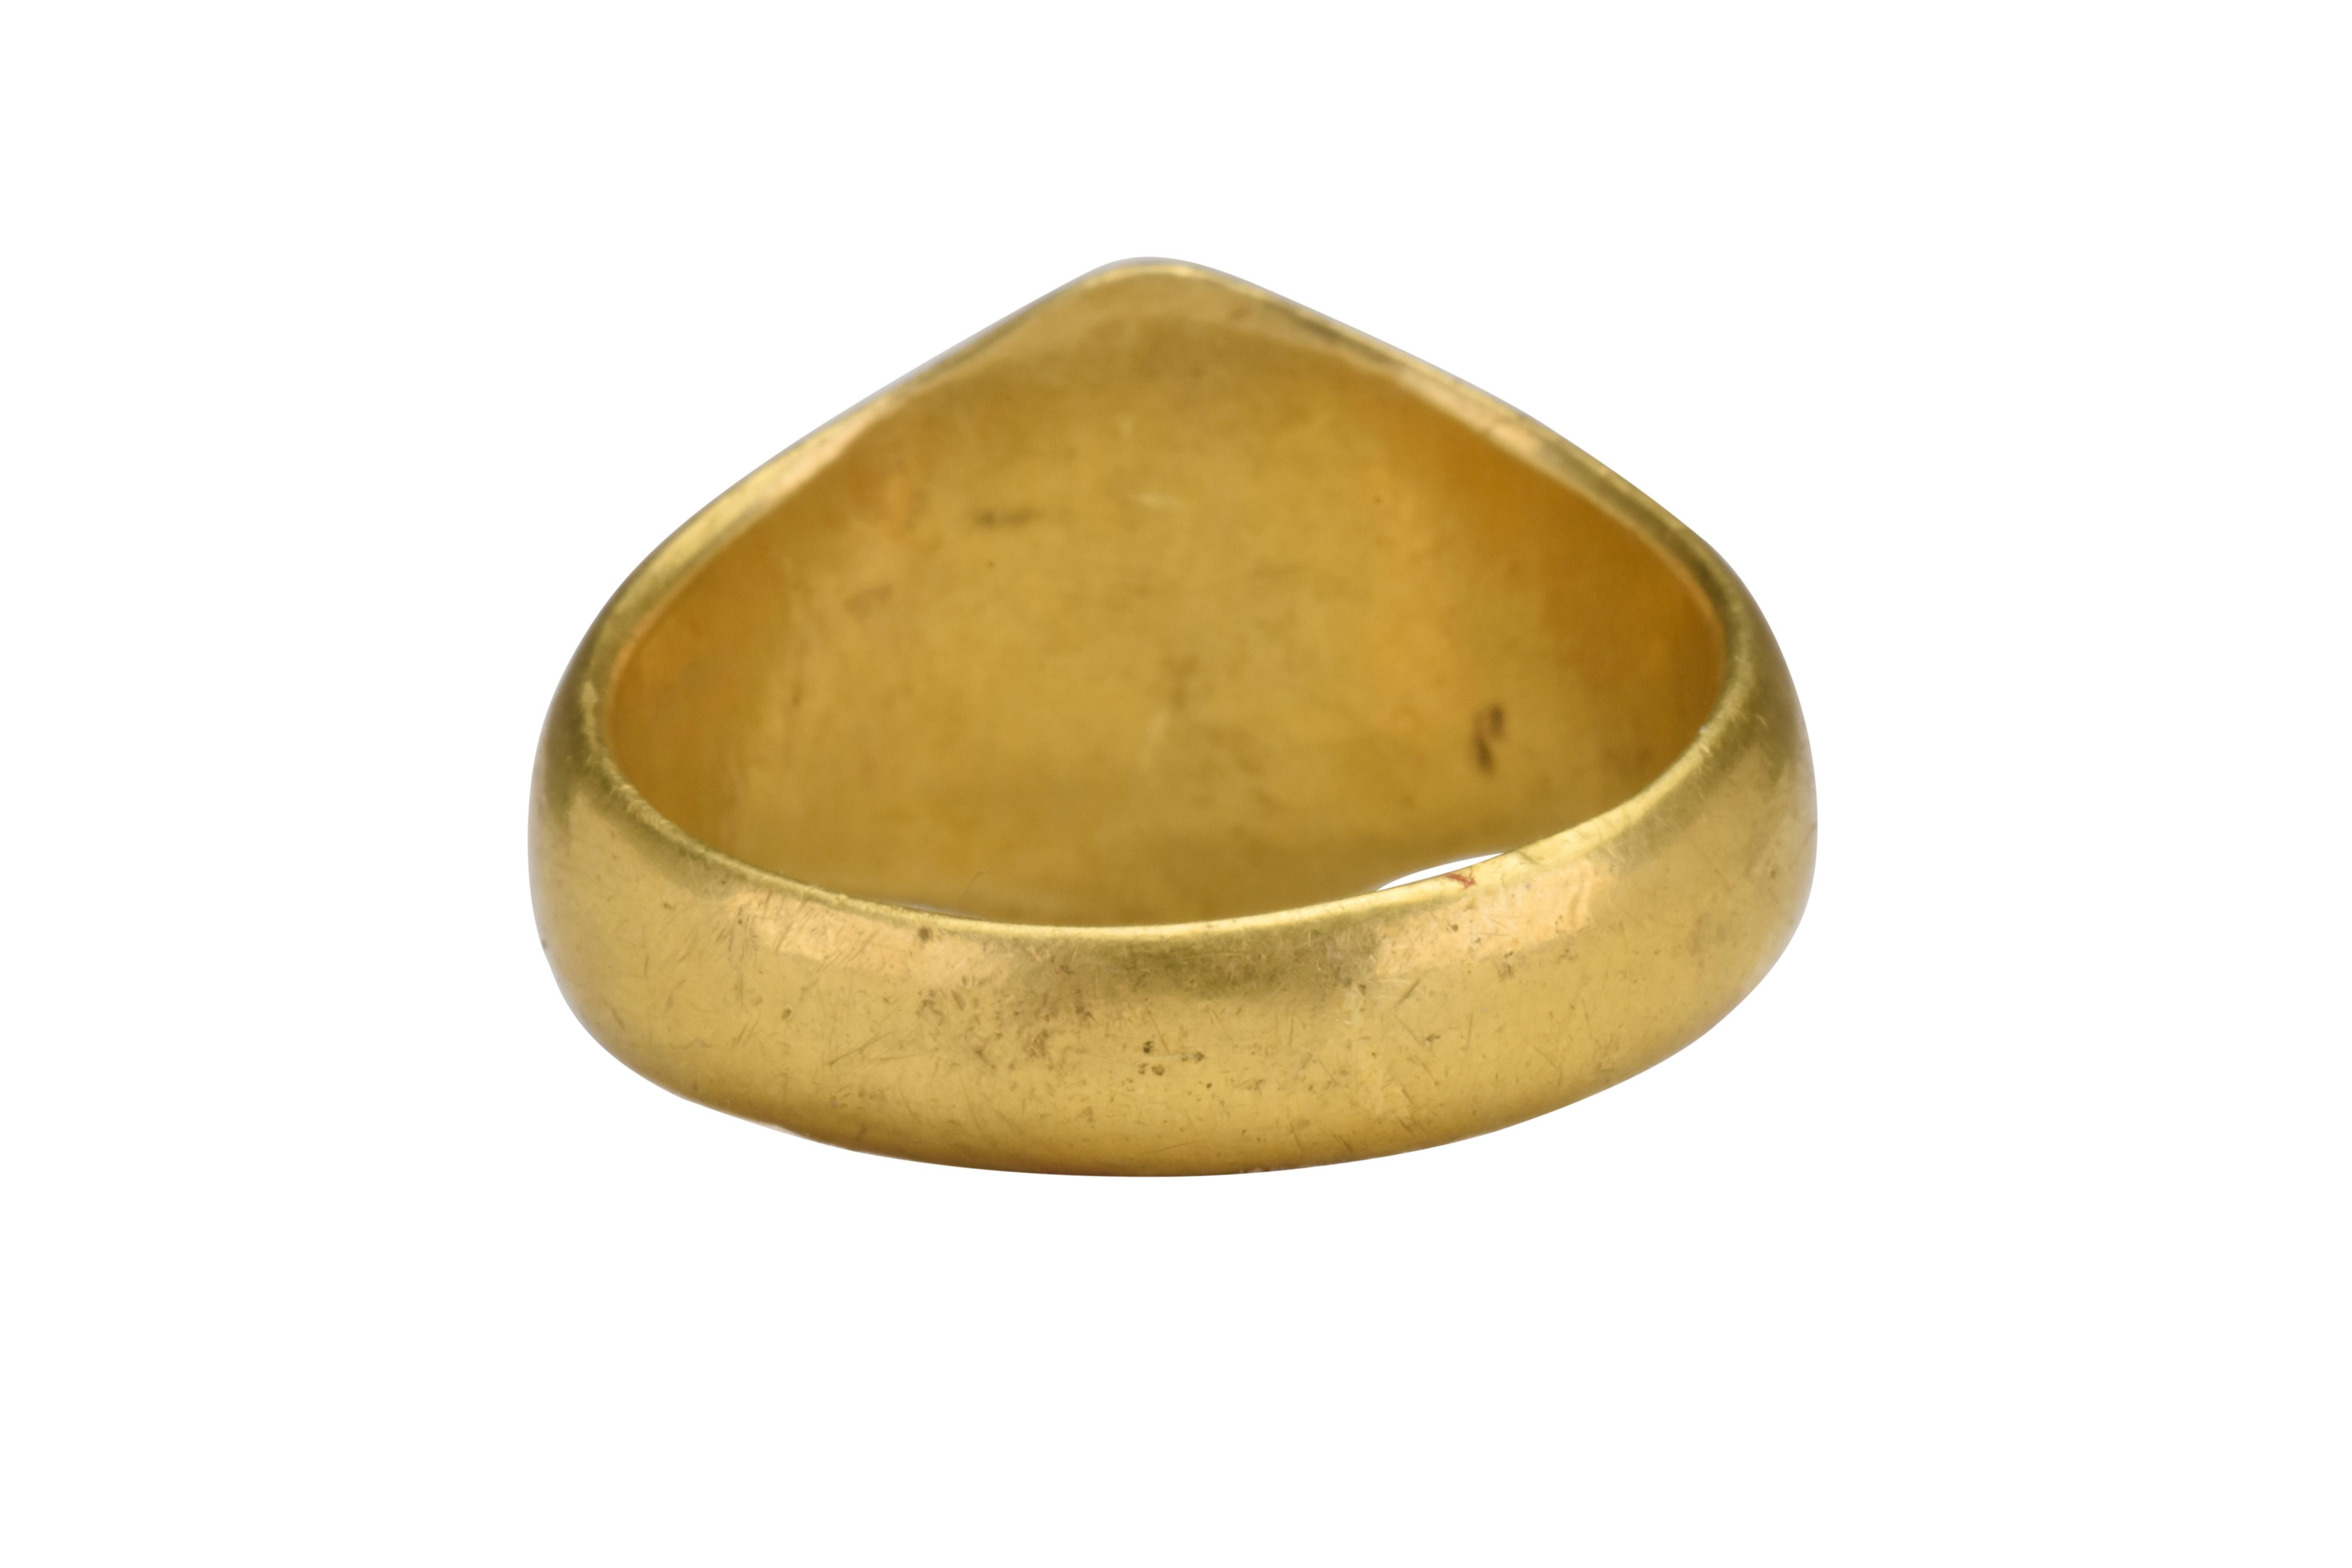 Classical Roman Ancient Roman Signet Gold Ring with Silver Center